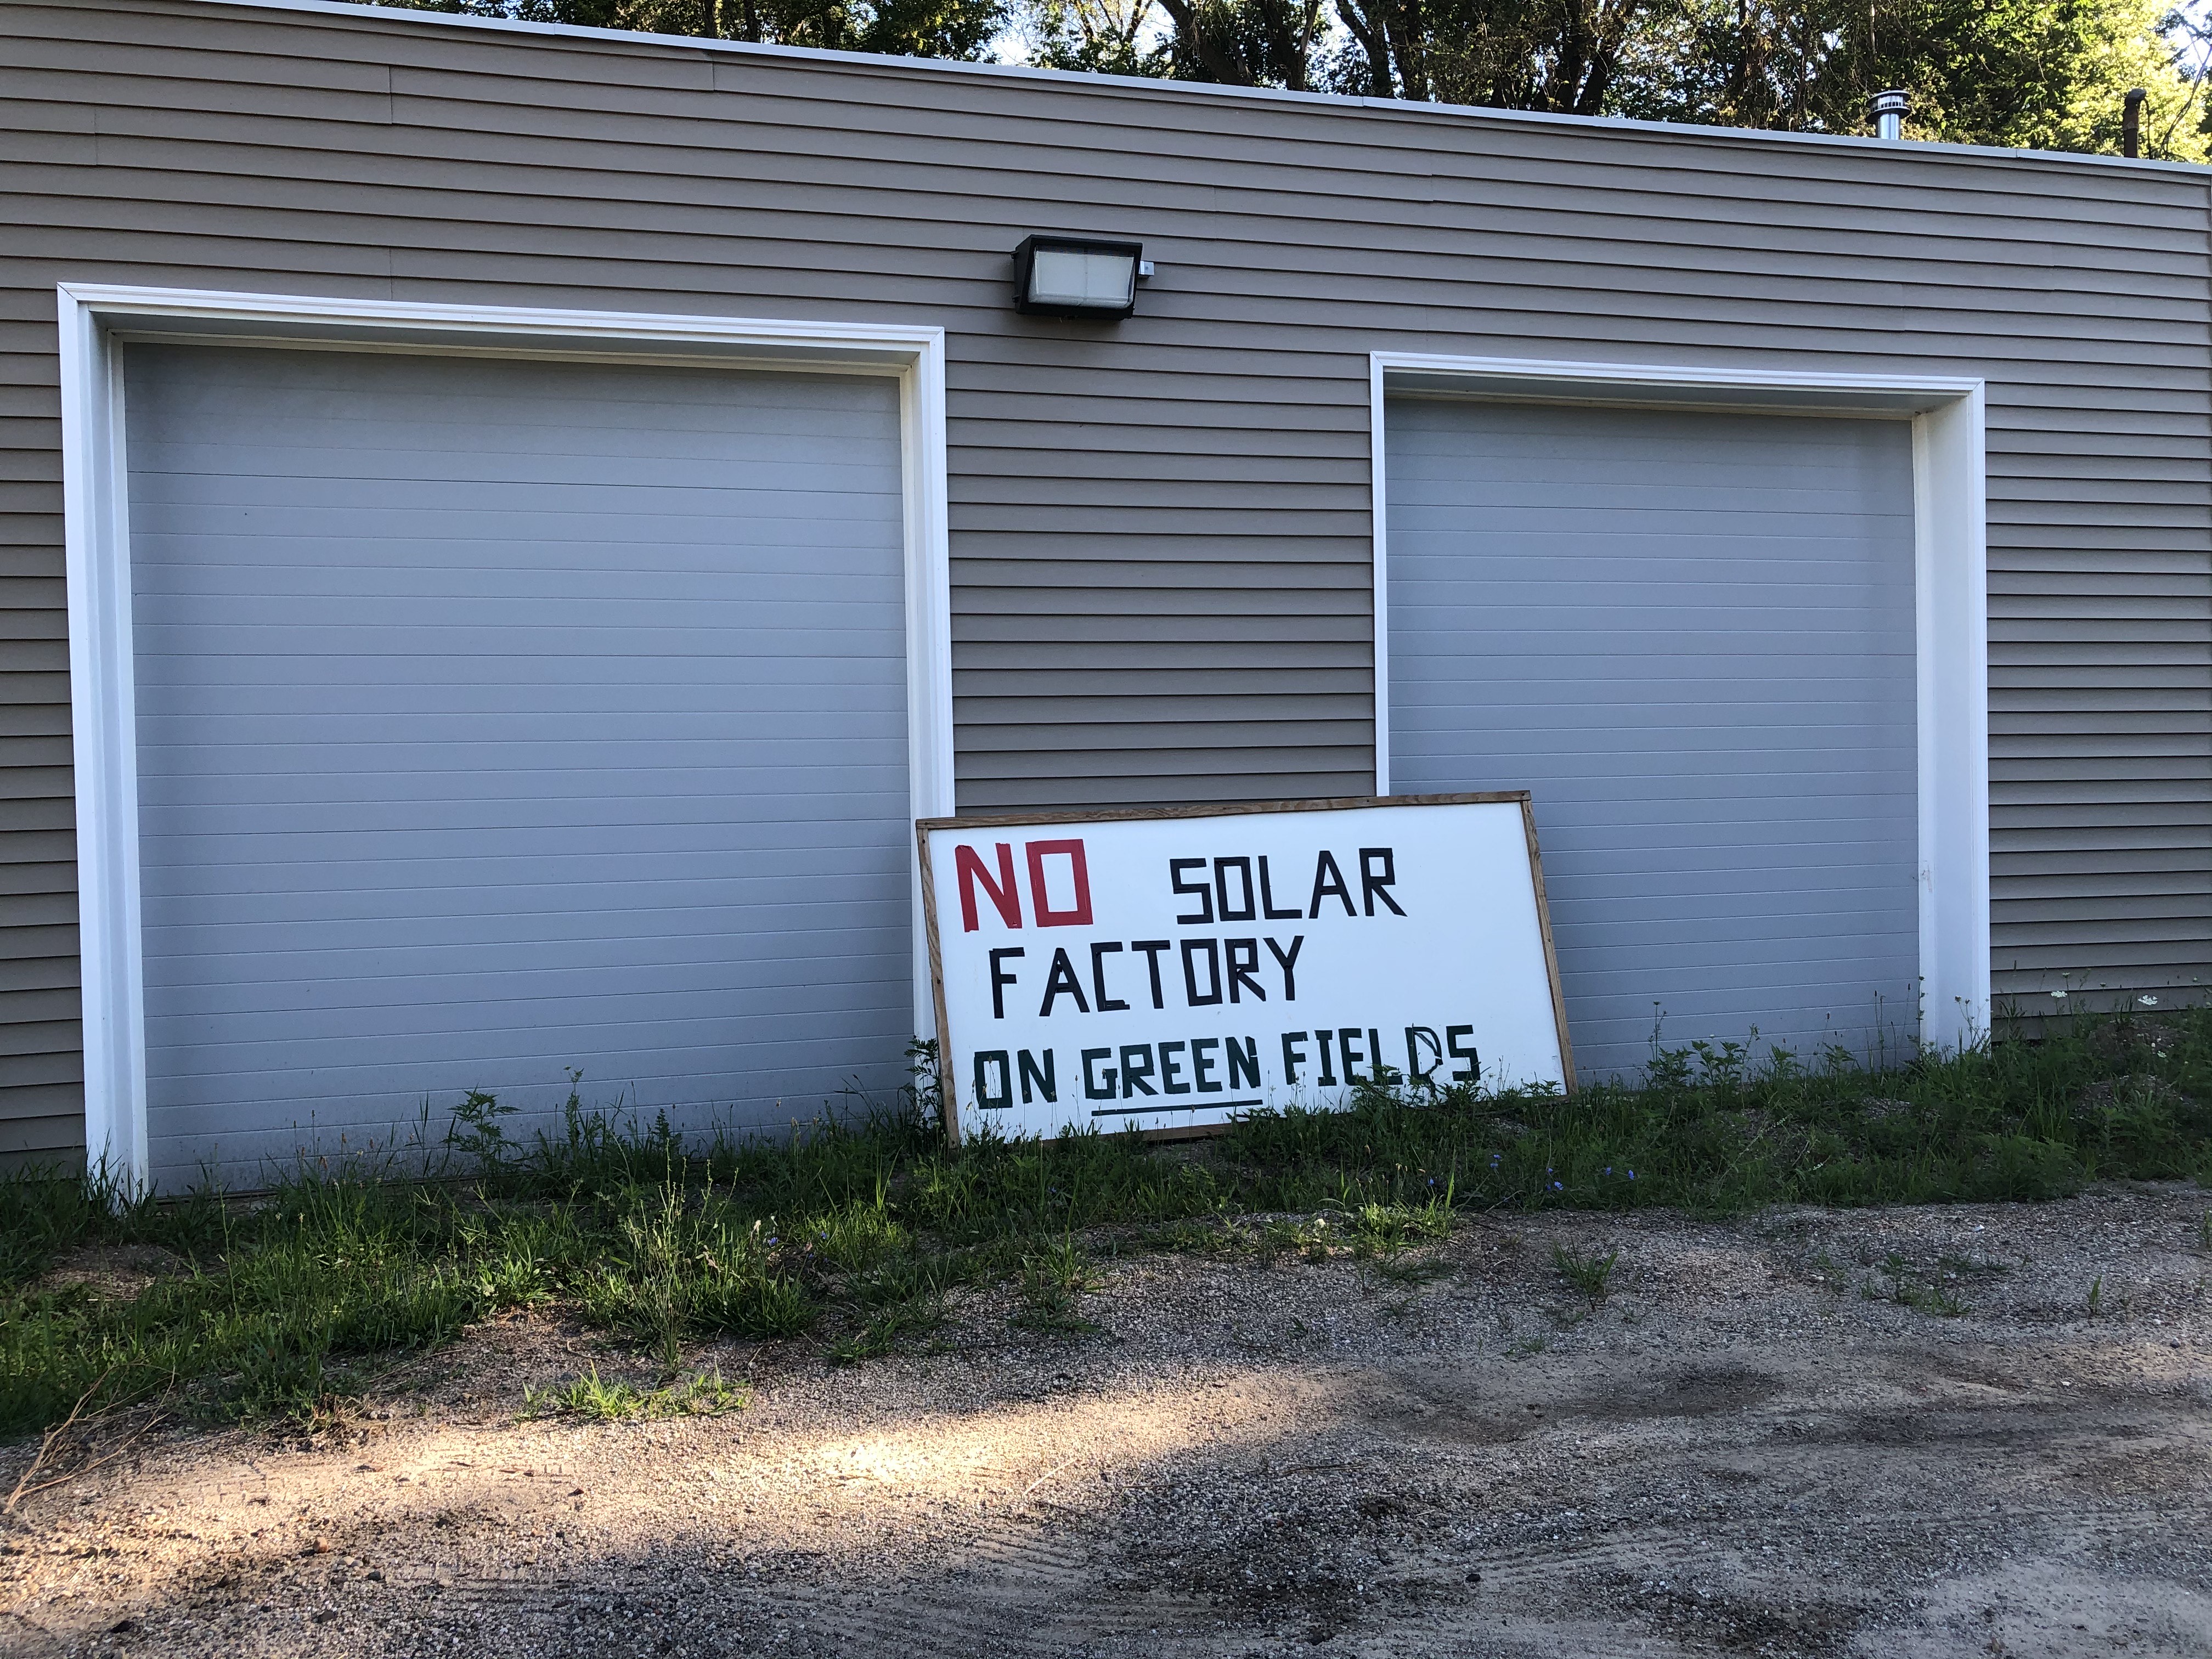 Lettered yard sign saying “No solar factory on green fields” leaning against a beige building.